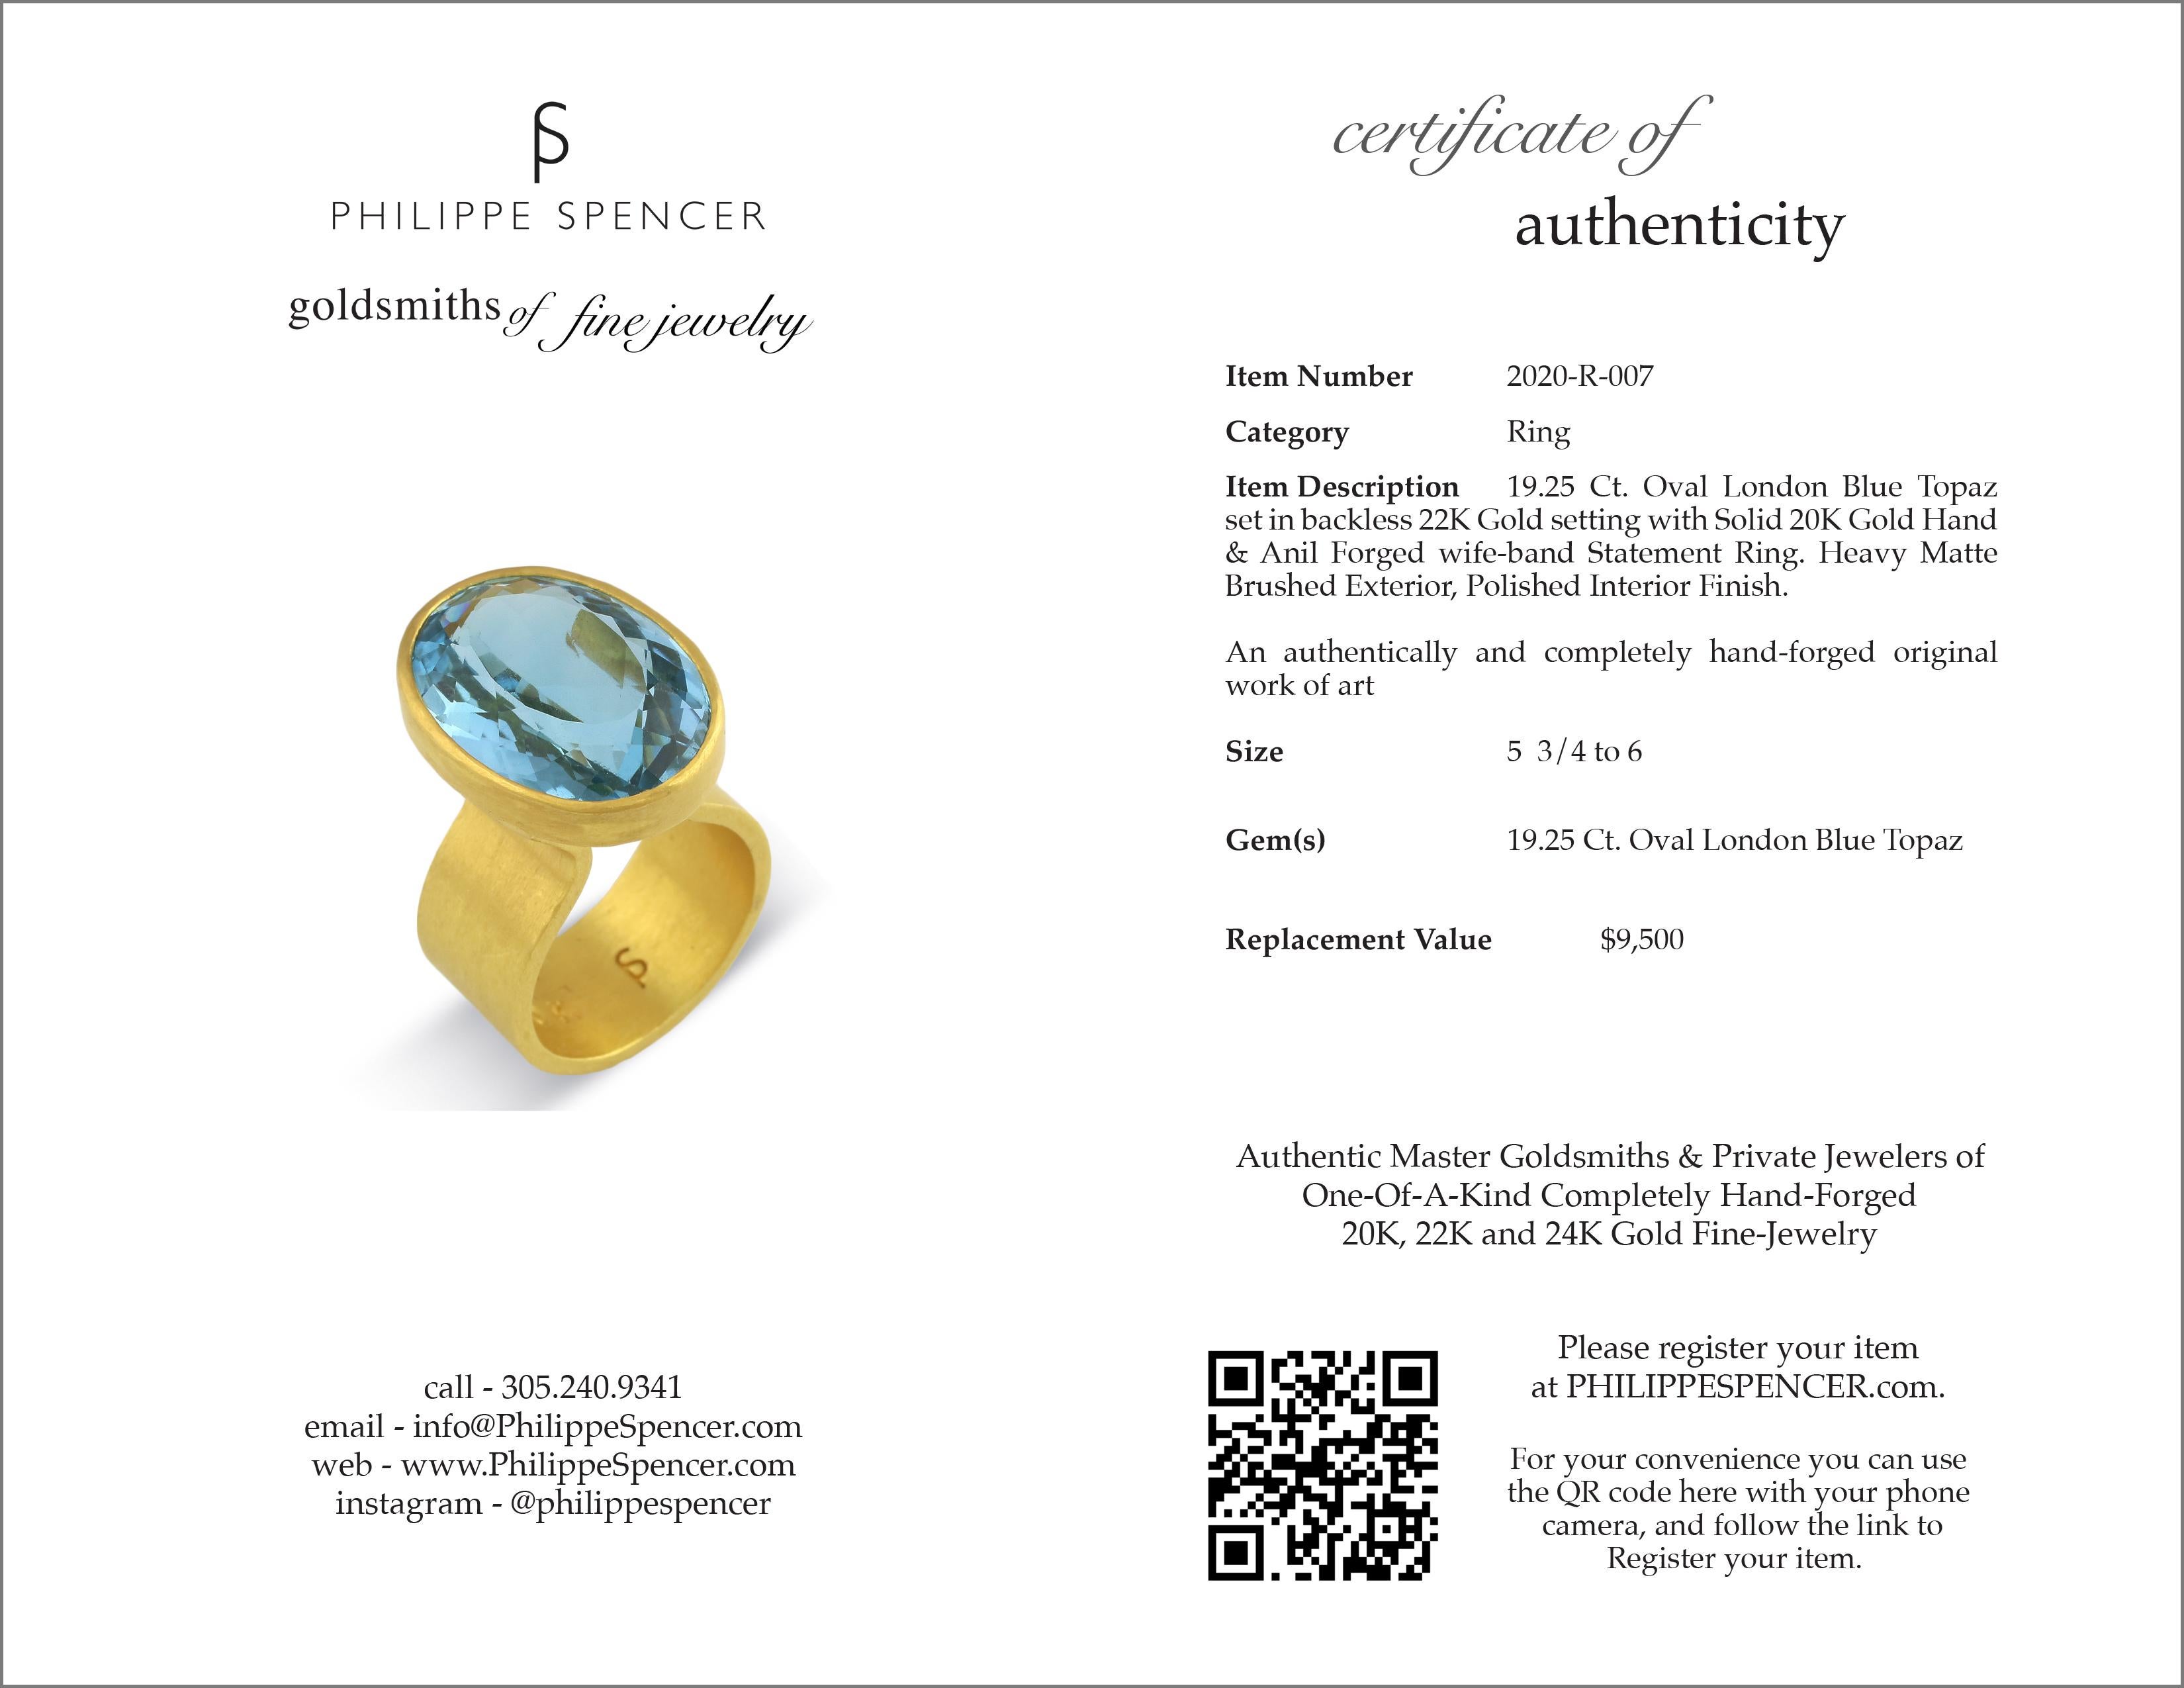 Oval Cut PHILIPPE SPENCER 19.25 Ct. Blue Topaz in 22K and 20K Gold Statement Ring